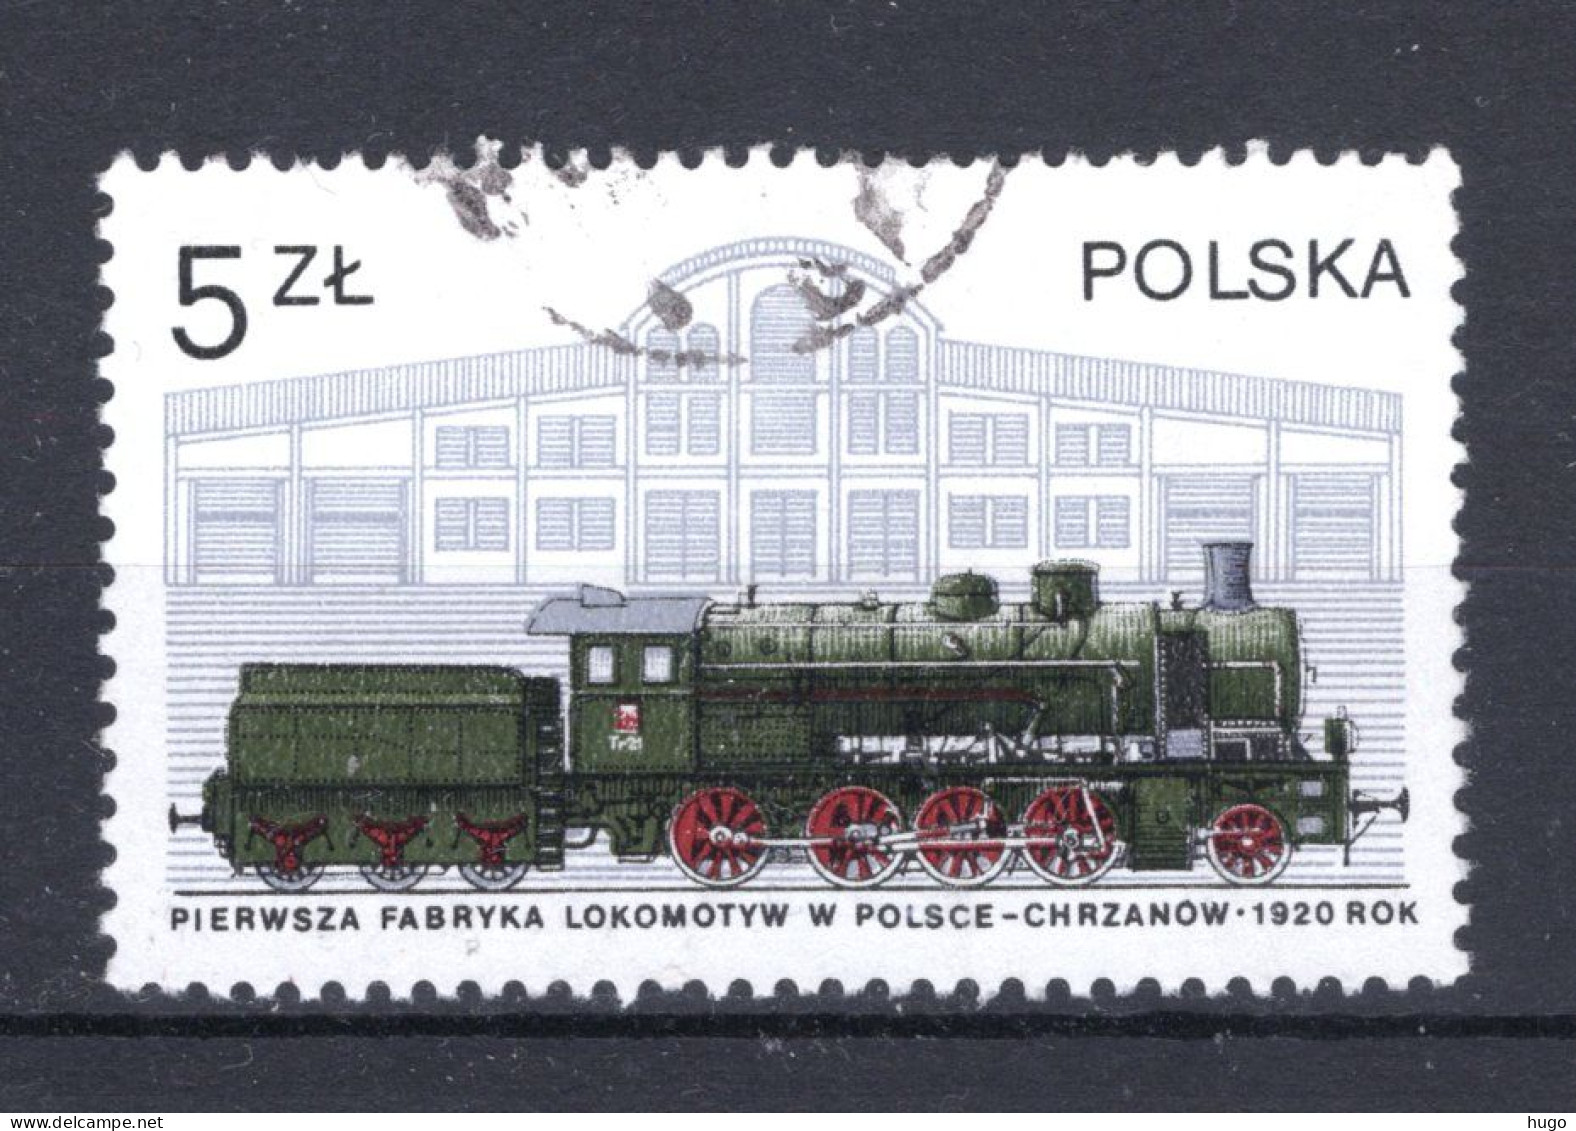 POLEN Yt. 2376° Gestempeld 1977 - Used Stamps